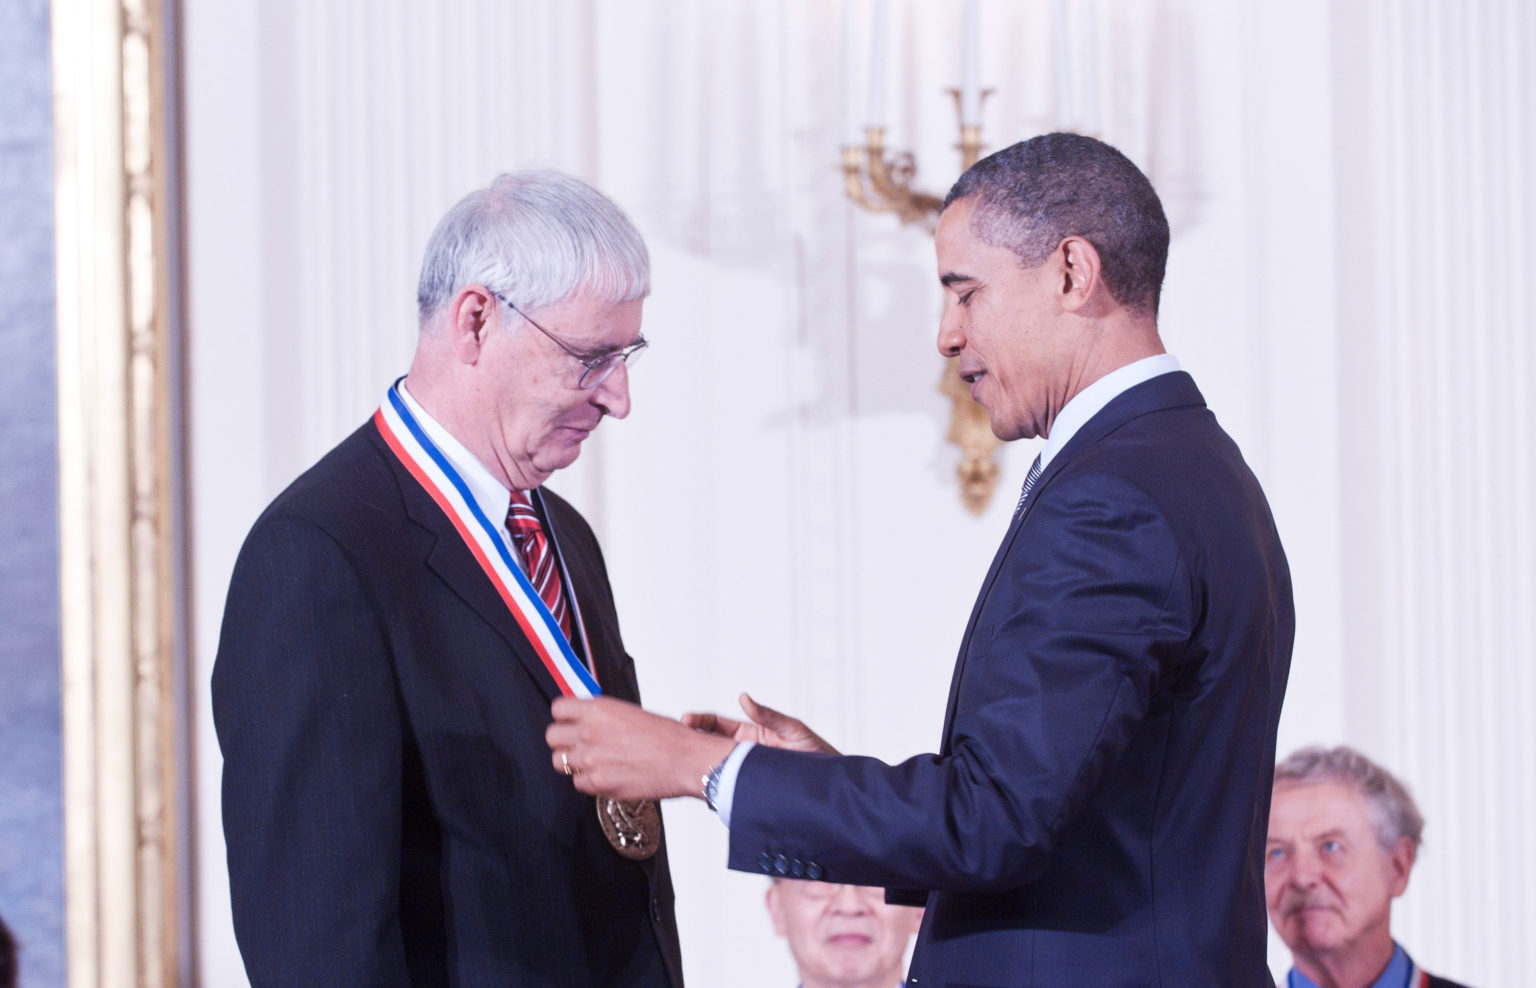 President Barack Obama awards Dr. Stang with the 2010 National Medal of Science